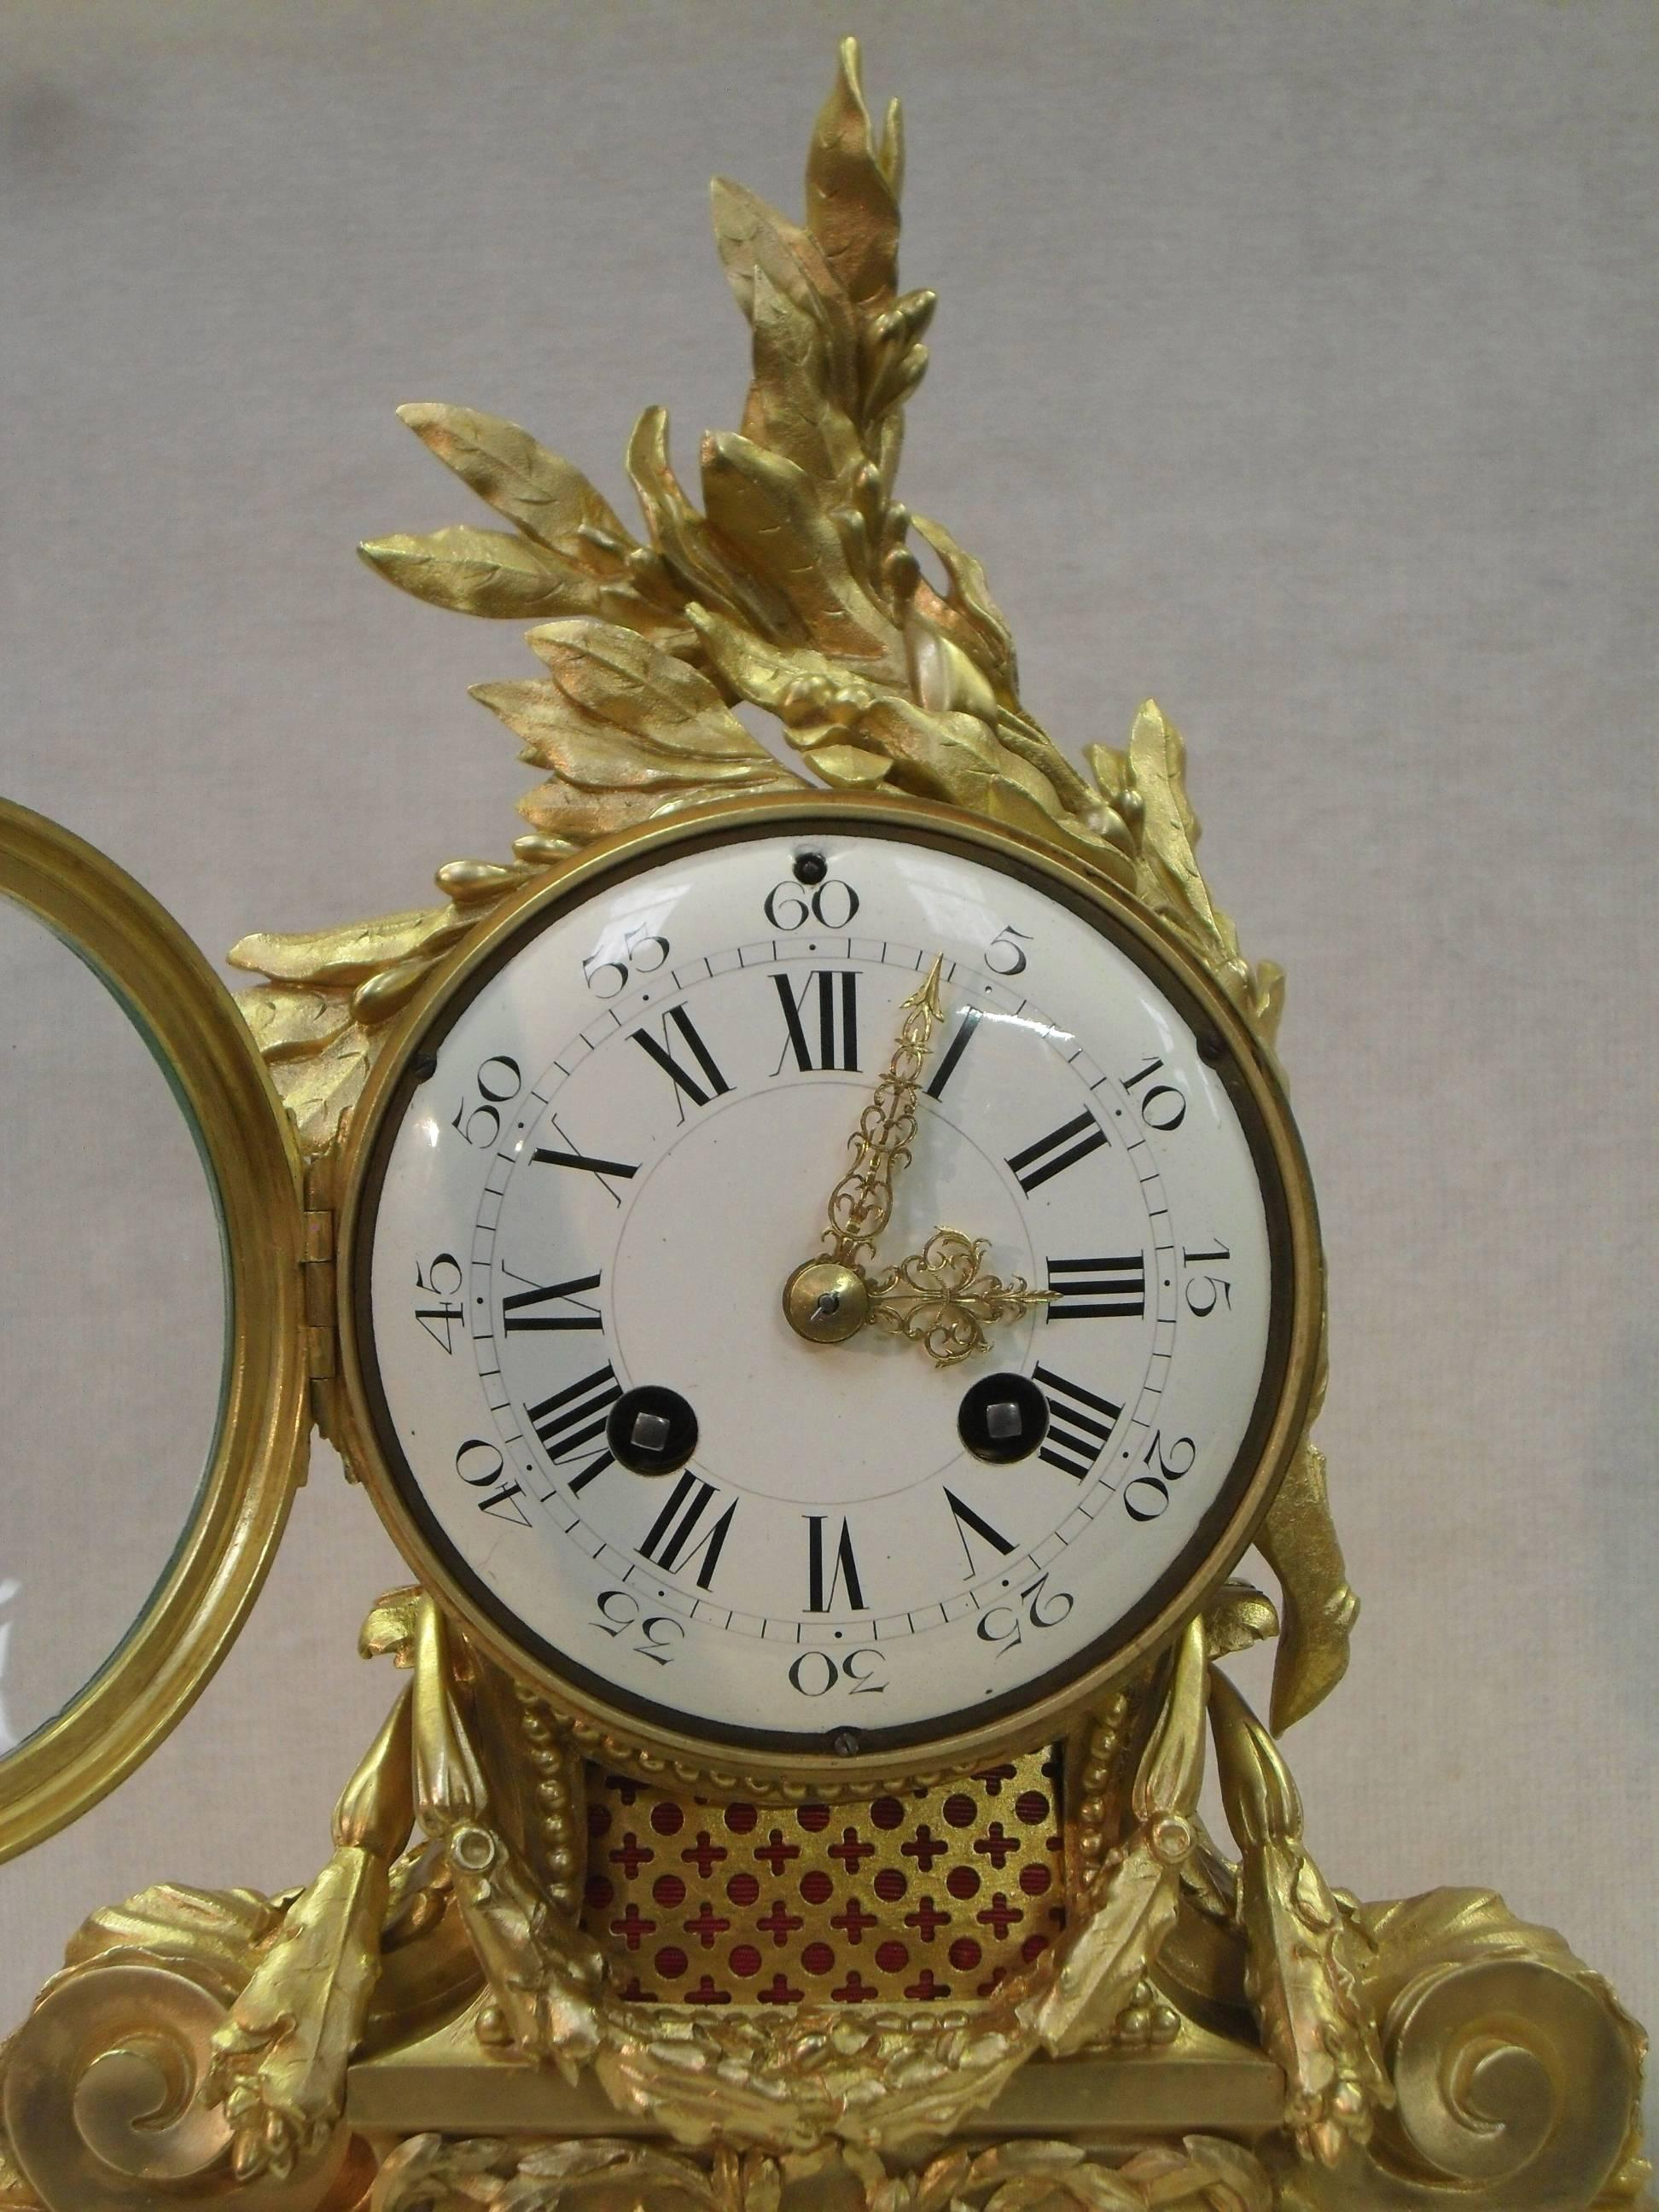 An extremely good quality French Louis XVI style bronze gilt mantel clock with scrolling foliate design, swags and beaded detail on shaped white Carrara marble base. The clock has a white enamel dial with French eight day movement which strikes the